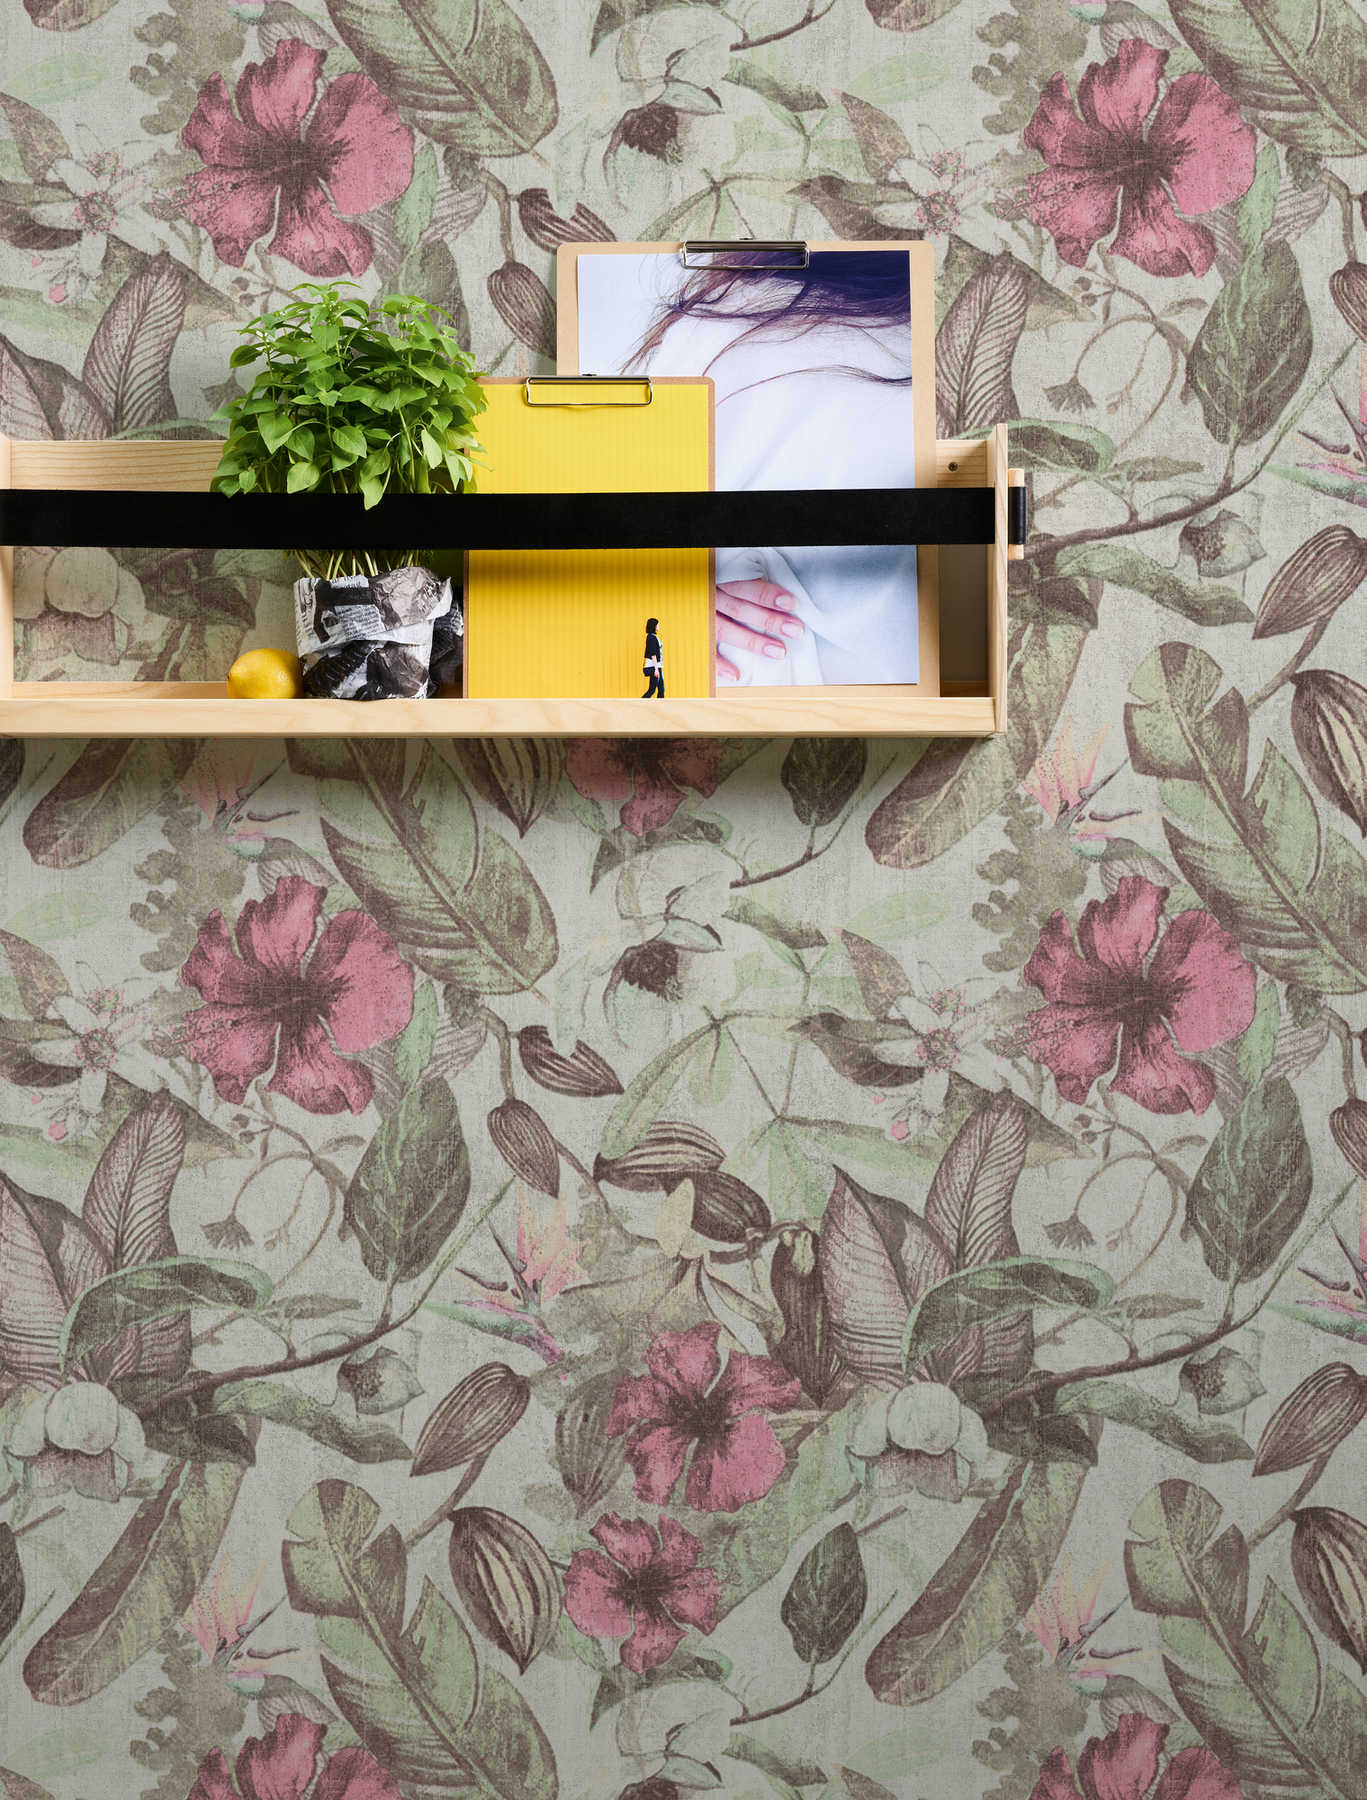             wallpaper floral pattern, tropical style & textile look - pink, green, brown
        